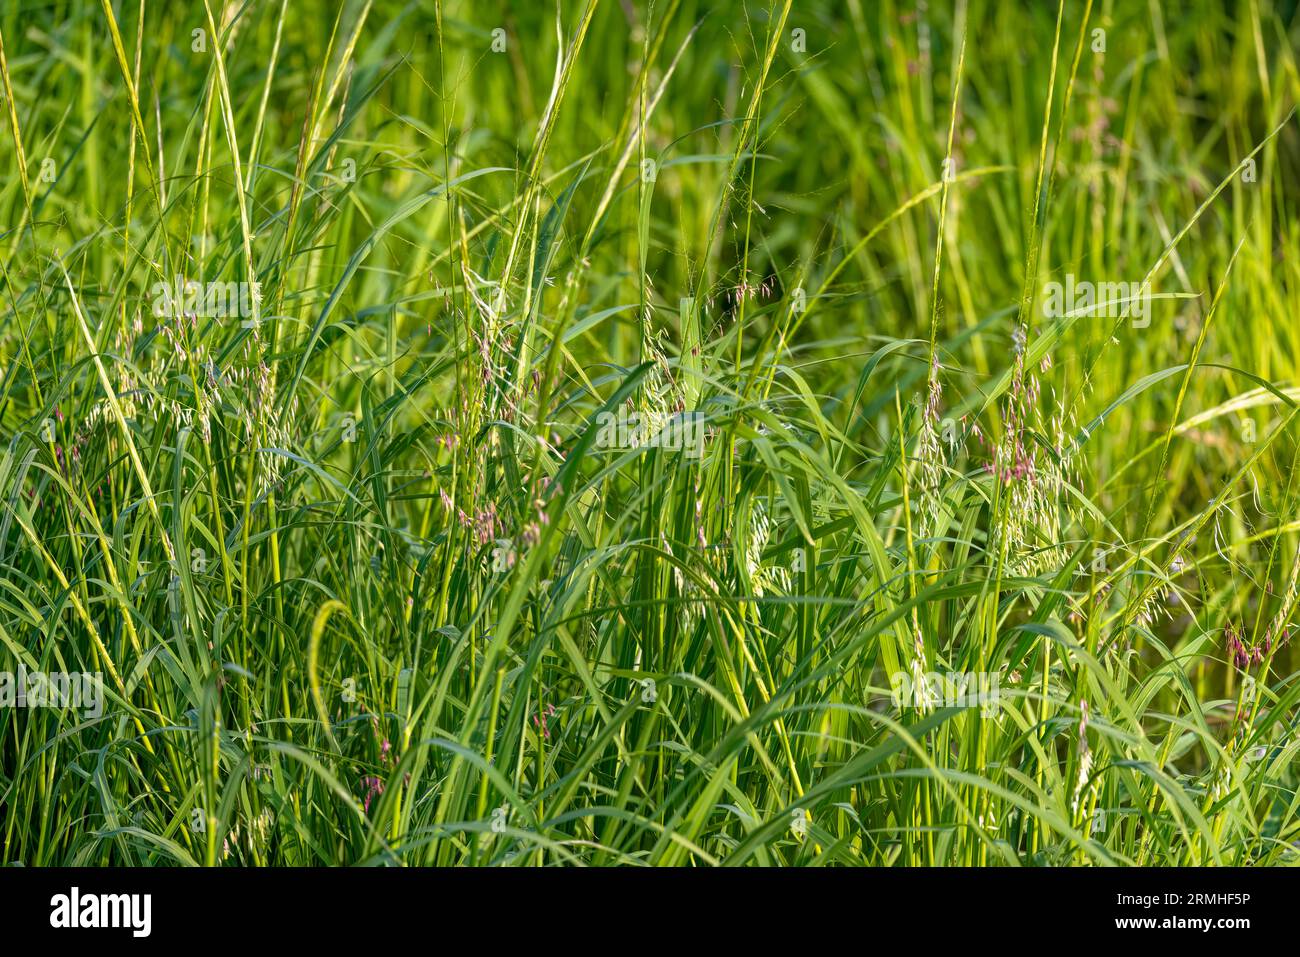 Northern wild rice (Zizania palustris) from Wisconsin. Annual plant native to the Great Lakes region of North America. Stock Photo